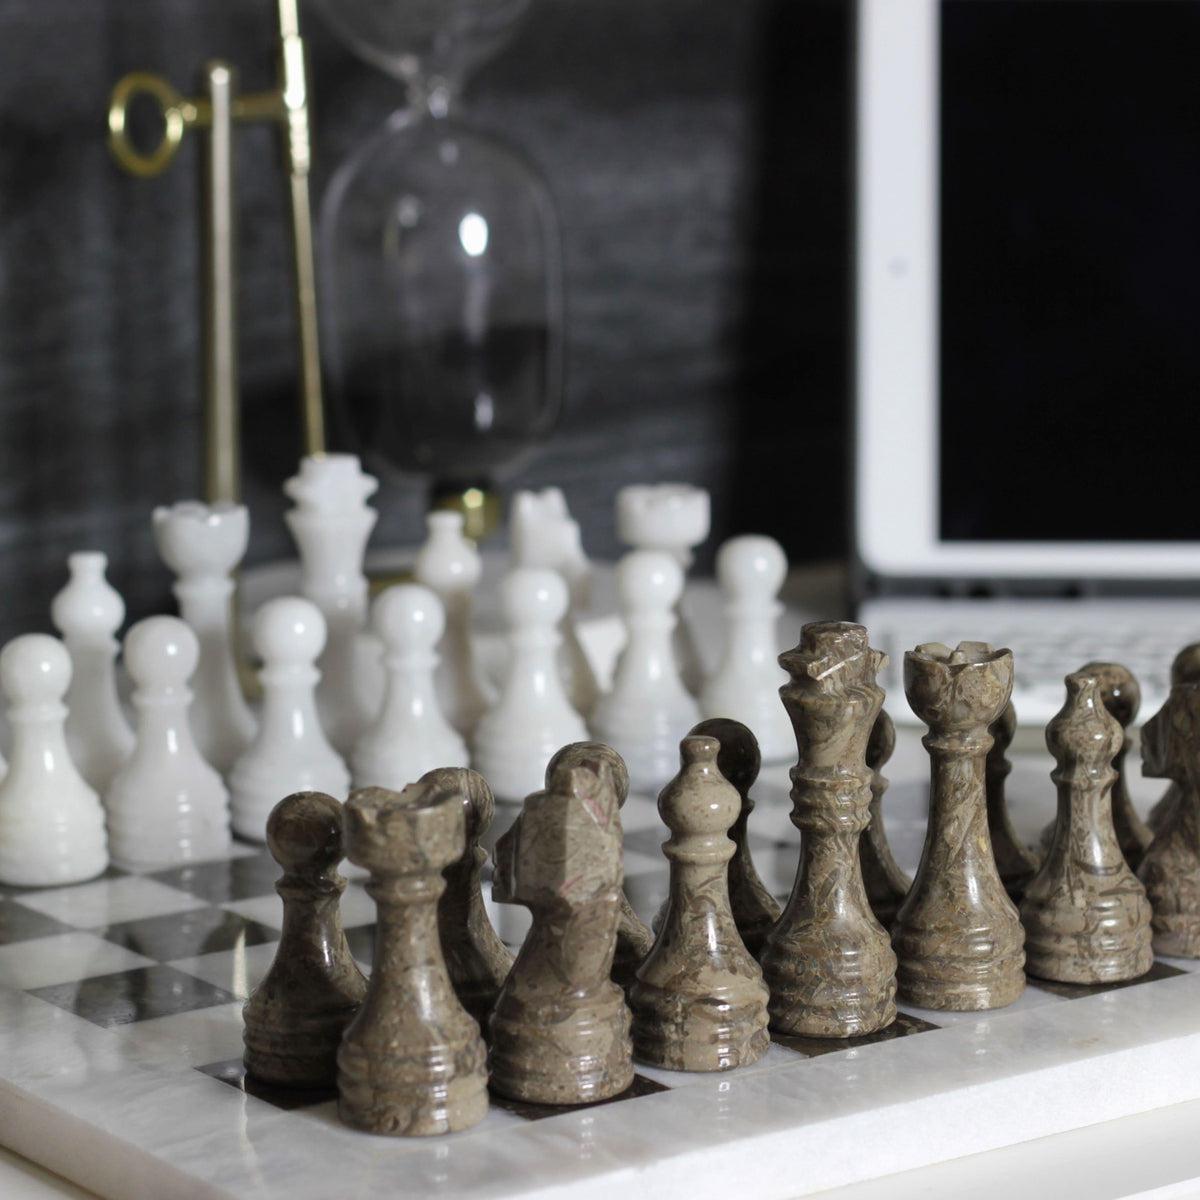 RADICALn Black and White Marble Big Chess Figures Complete 32